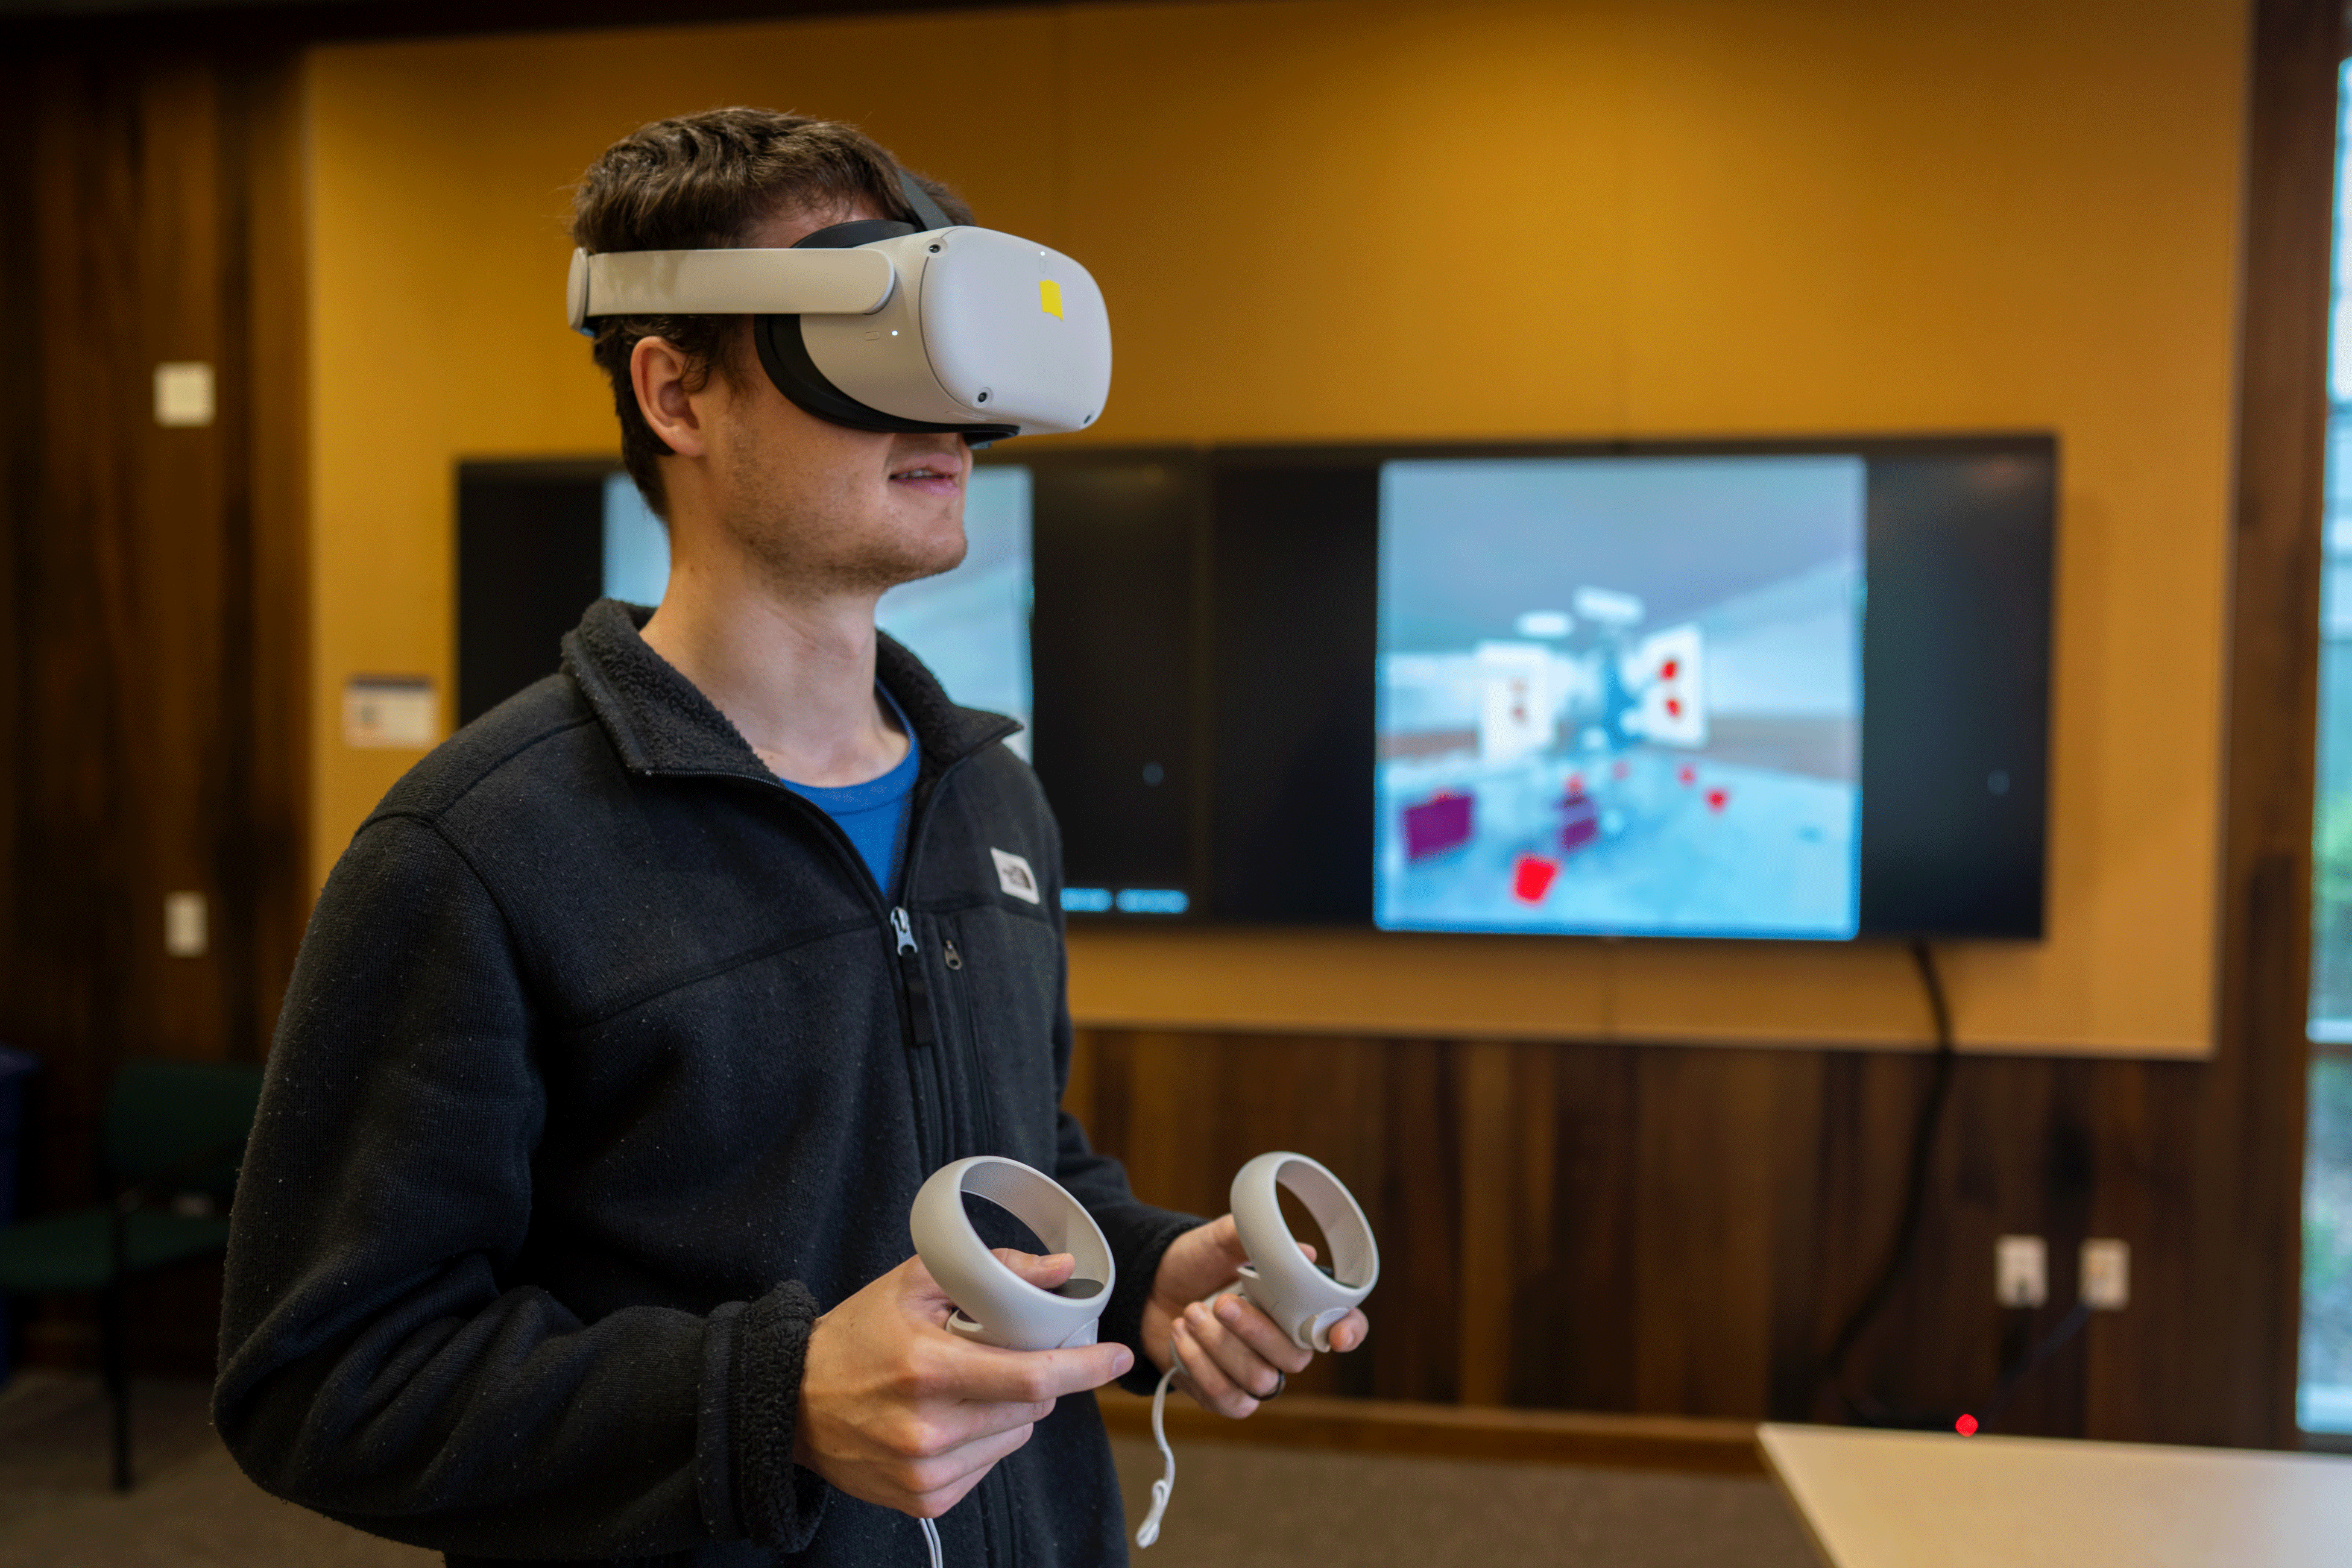 Shayne Morrissey, Ph.D. student and teaching assistant with the Department of Food Science and Technology, demonstrates virtual environment featuring a steam jacketed kettle. Photo by: Jael Mackendorf, UC Davis